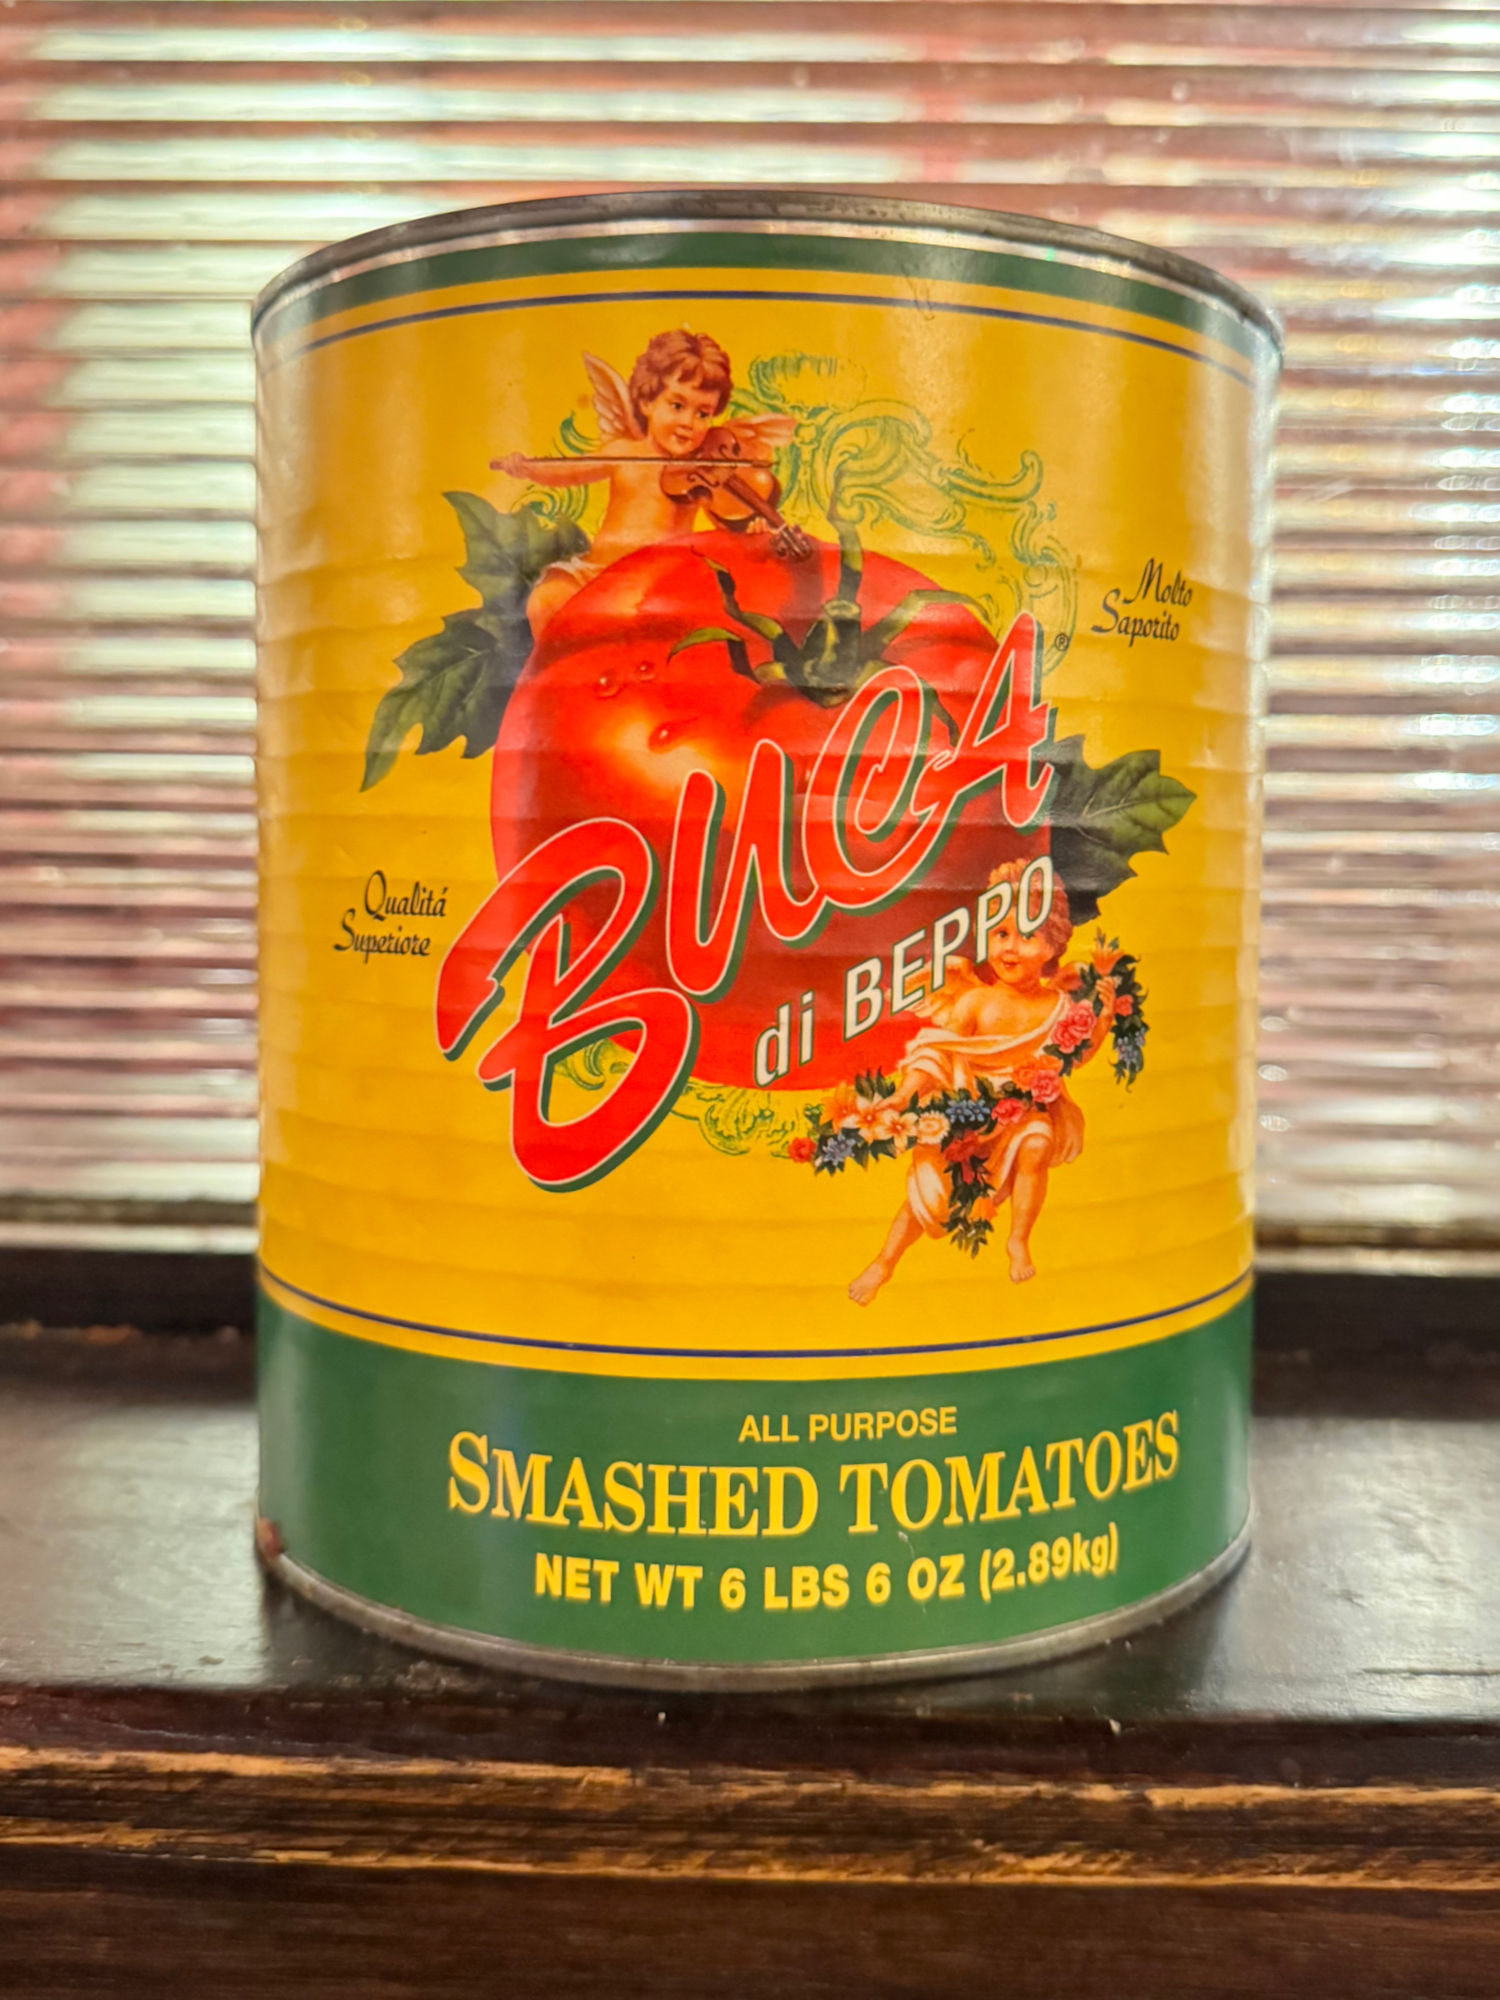 Buca di Beppo Smashed Tomatoes